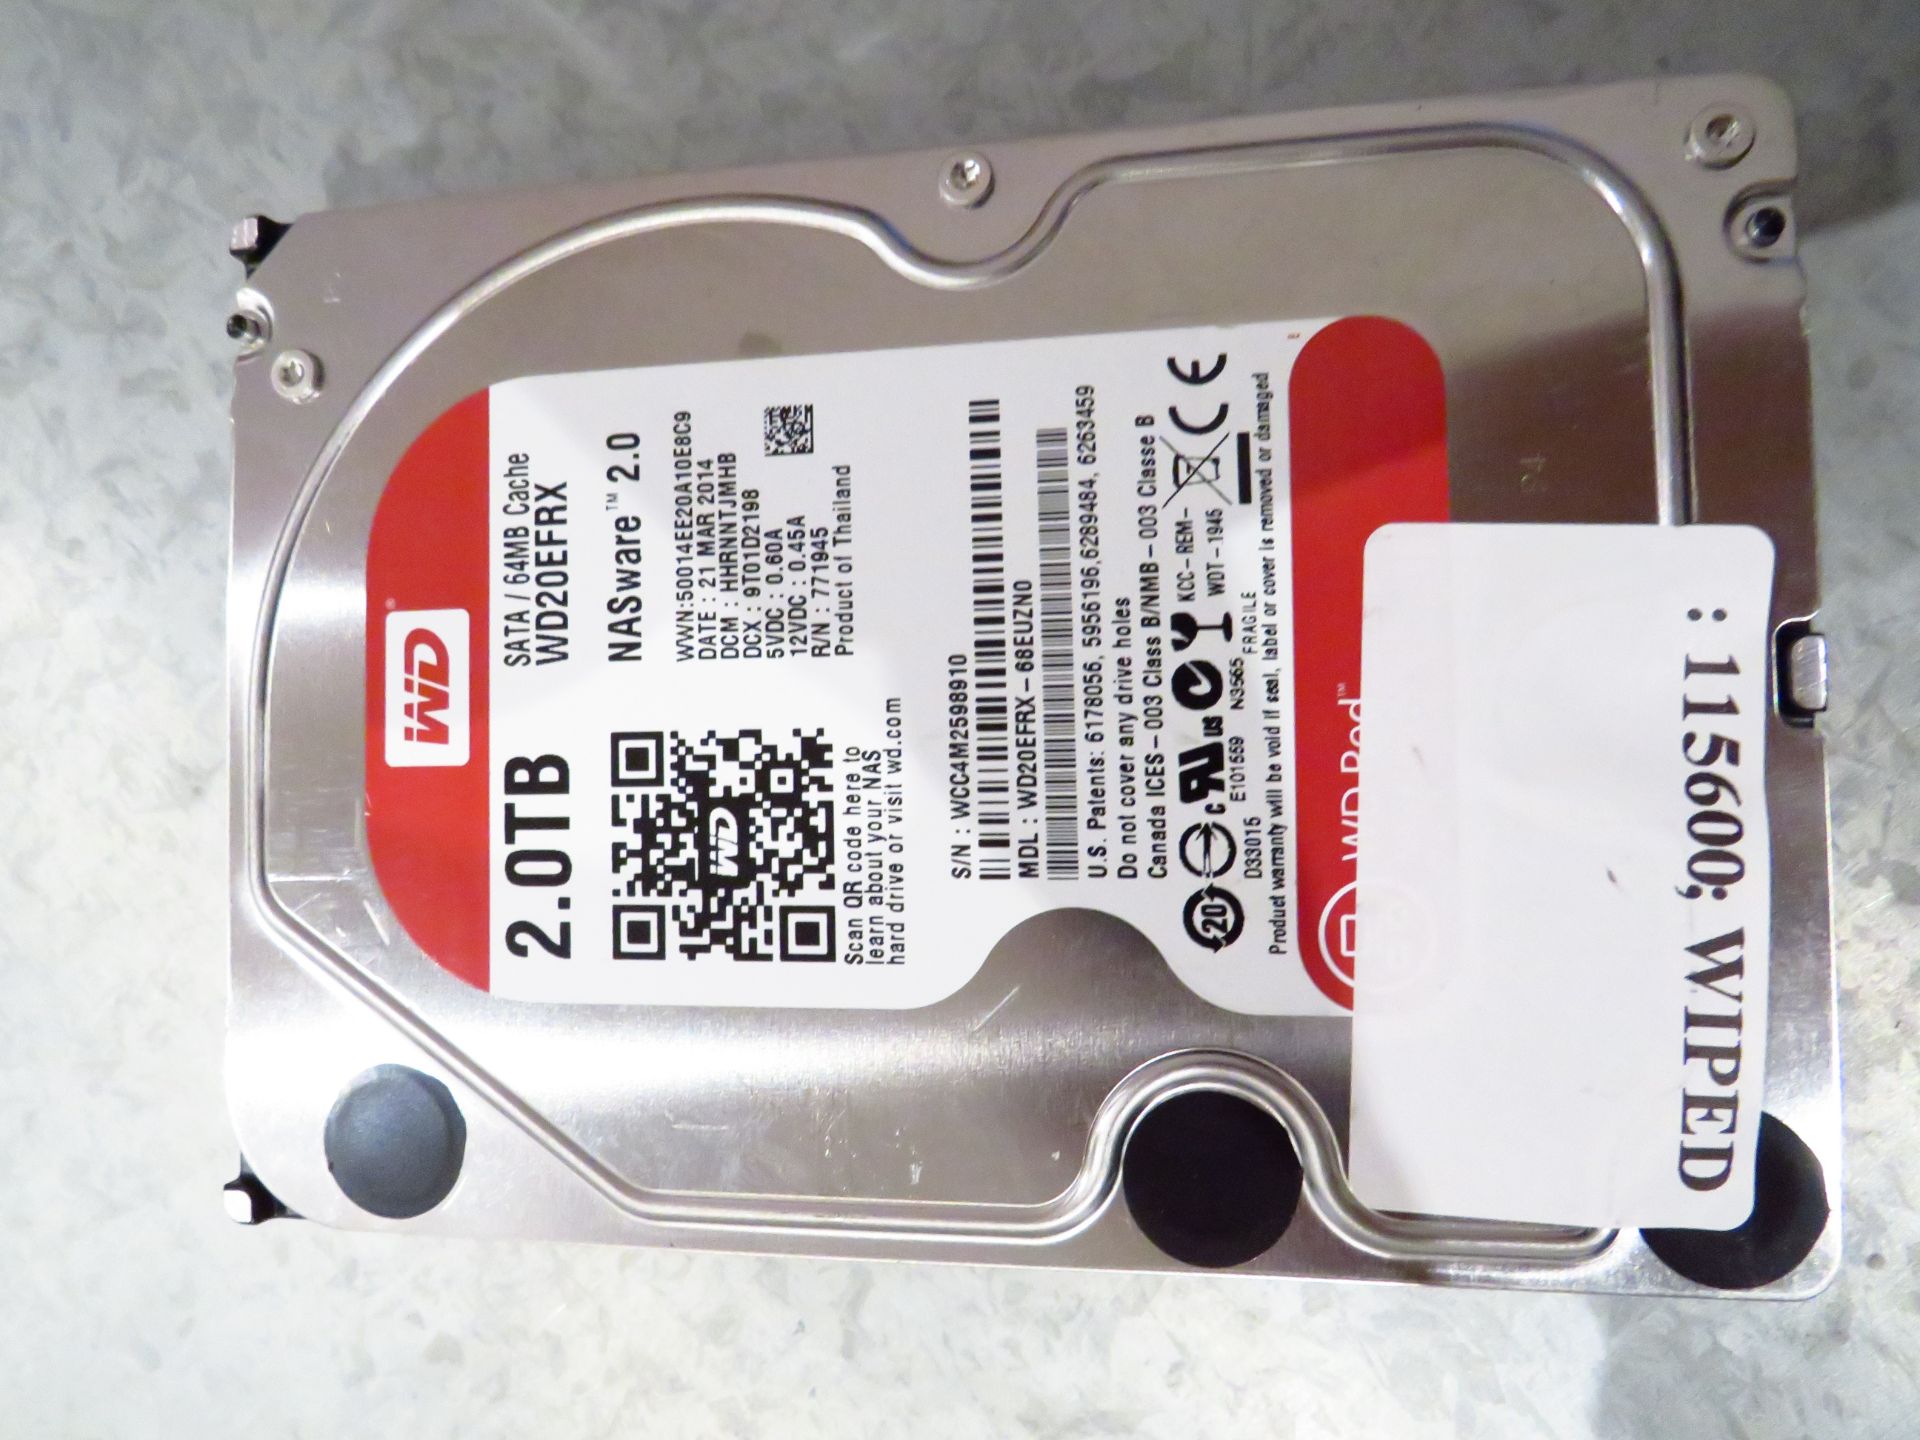 Western Digital WD20EFRX 2TB hard drive, unchecked but has been professionally wiped